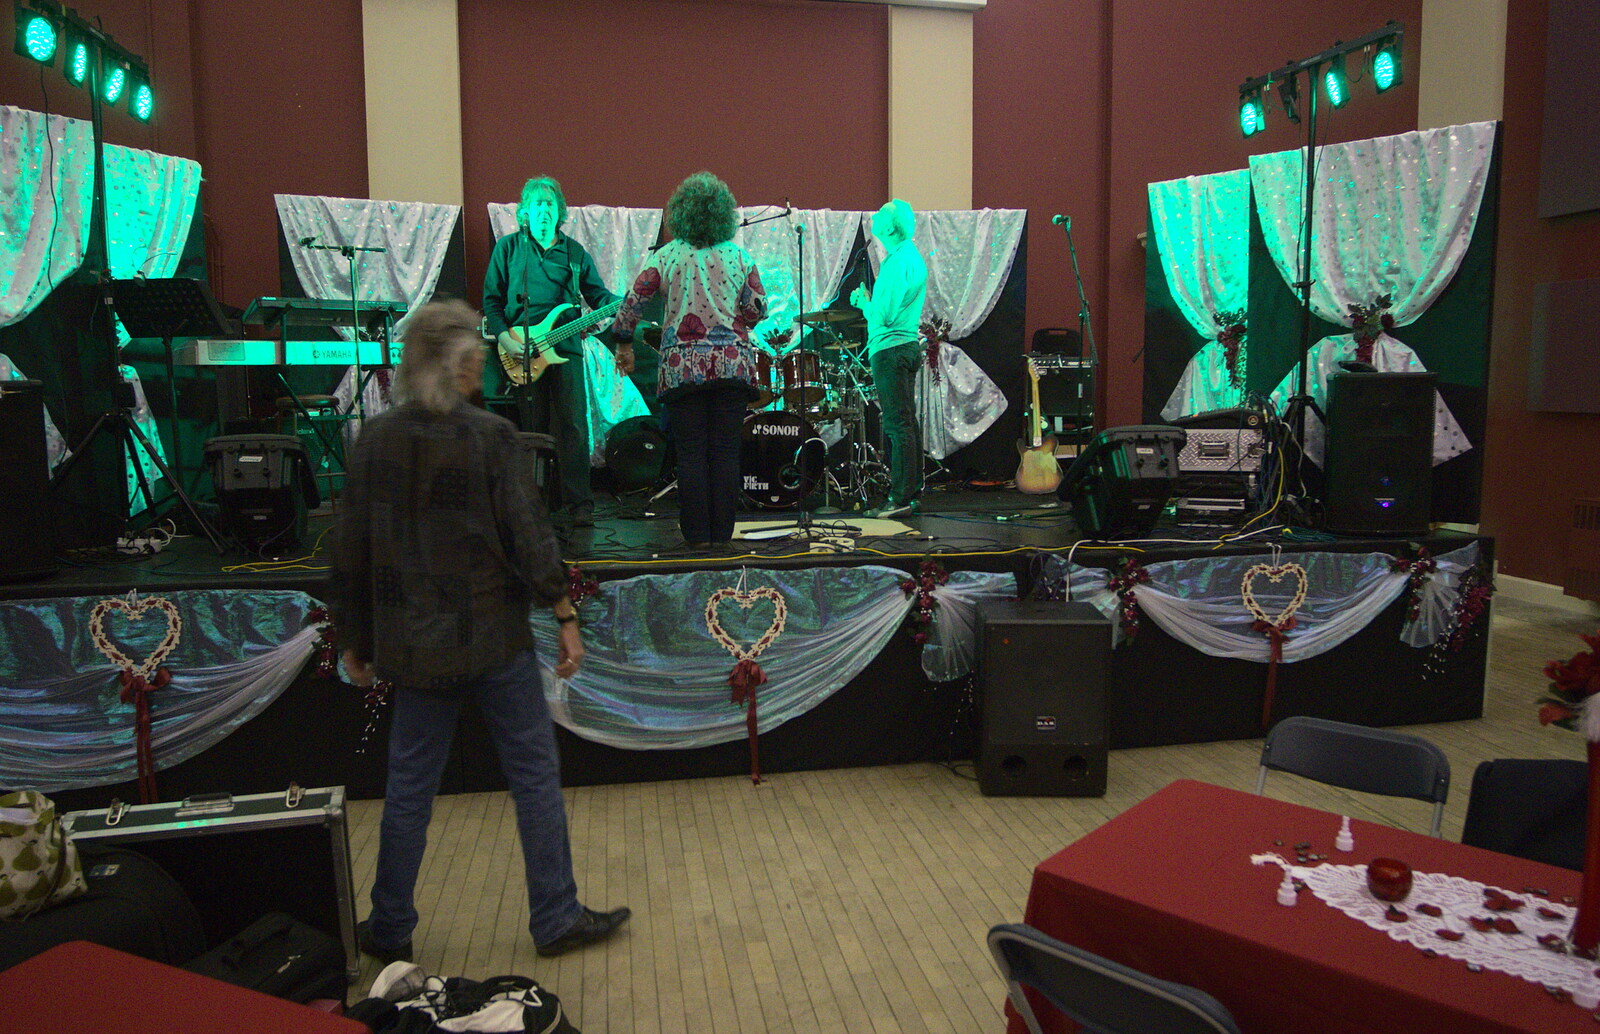 Rob roams around as the band sets up from The BBs at The Cornhall, Diss, Norfolk - 31st January 2013